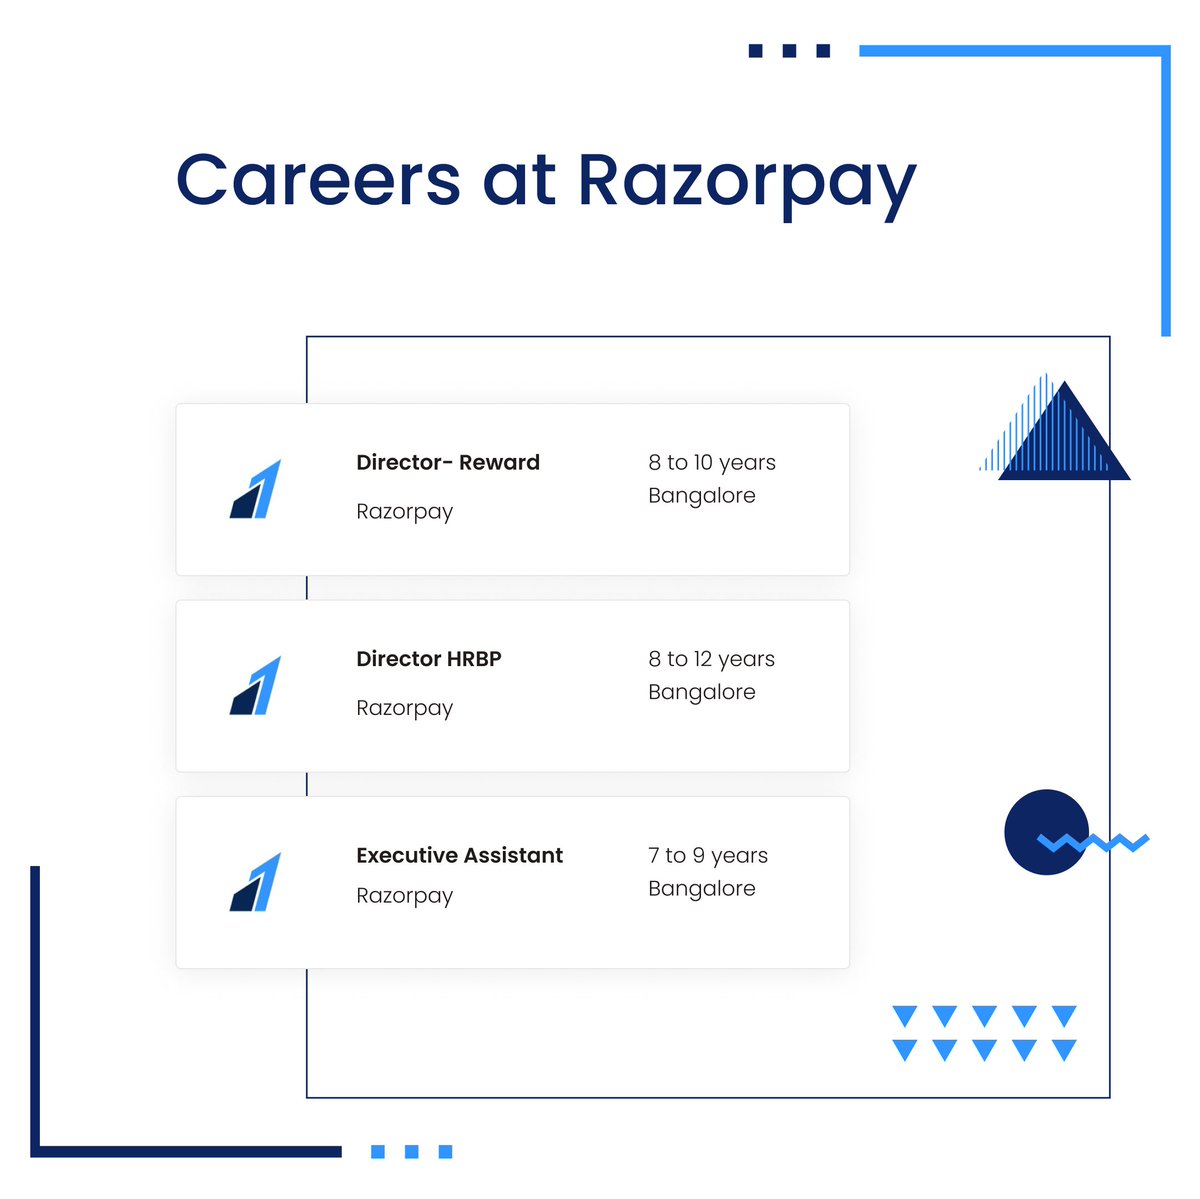 #KnowTheStartup 
Spottabl is #rewiringhiring for Razorpay 😎 the preferred online payment partner🔥 Join this club of innovators, dreamers, and challengers. #CurrentlyHiring for several roles. 
spottabl.com/company/razorp… 👈
#startupjobs #jobs #hiringnow #startups #opportunities